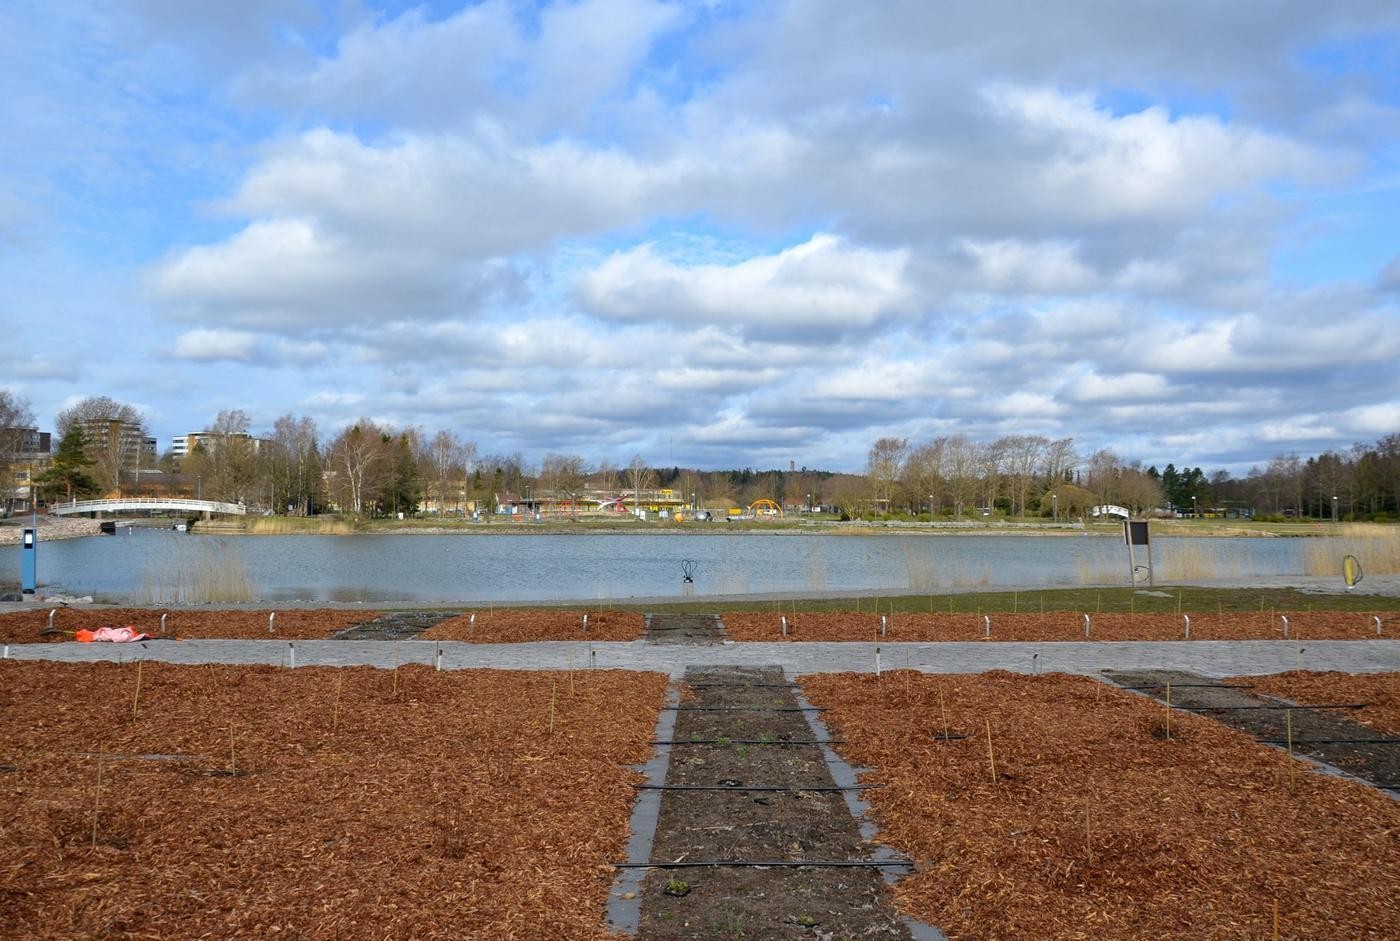 A park was recently planted on the edge of the water